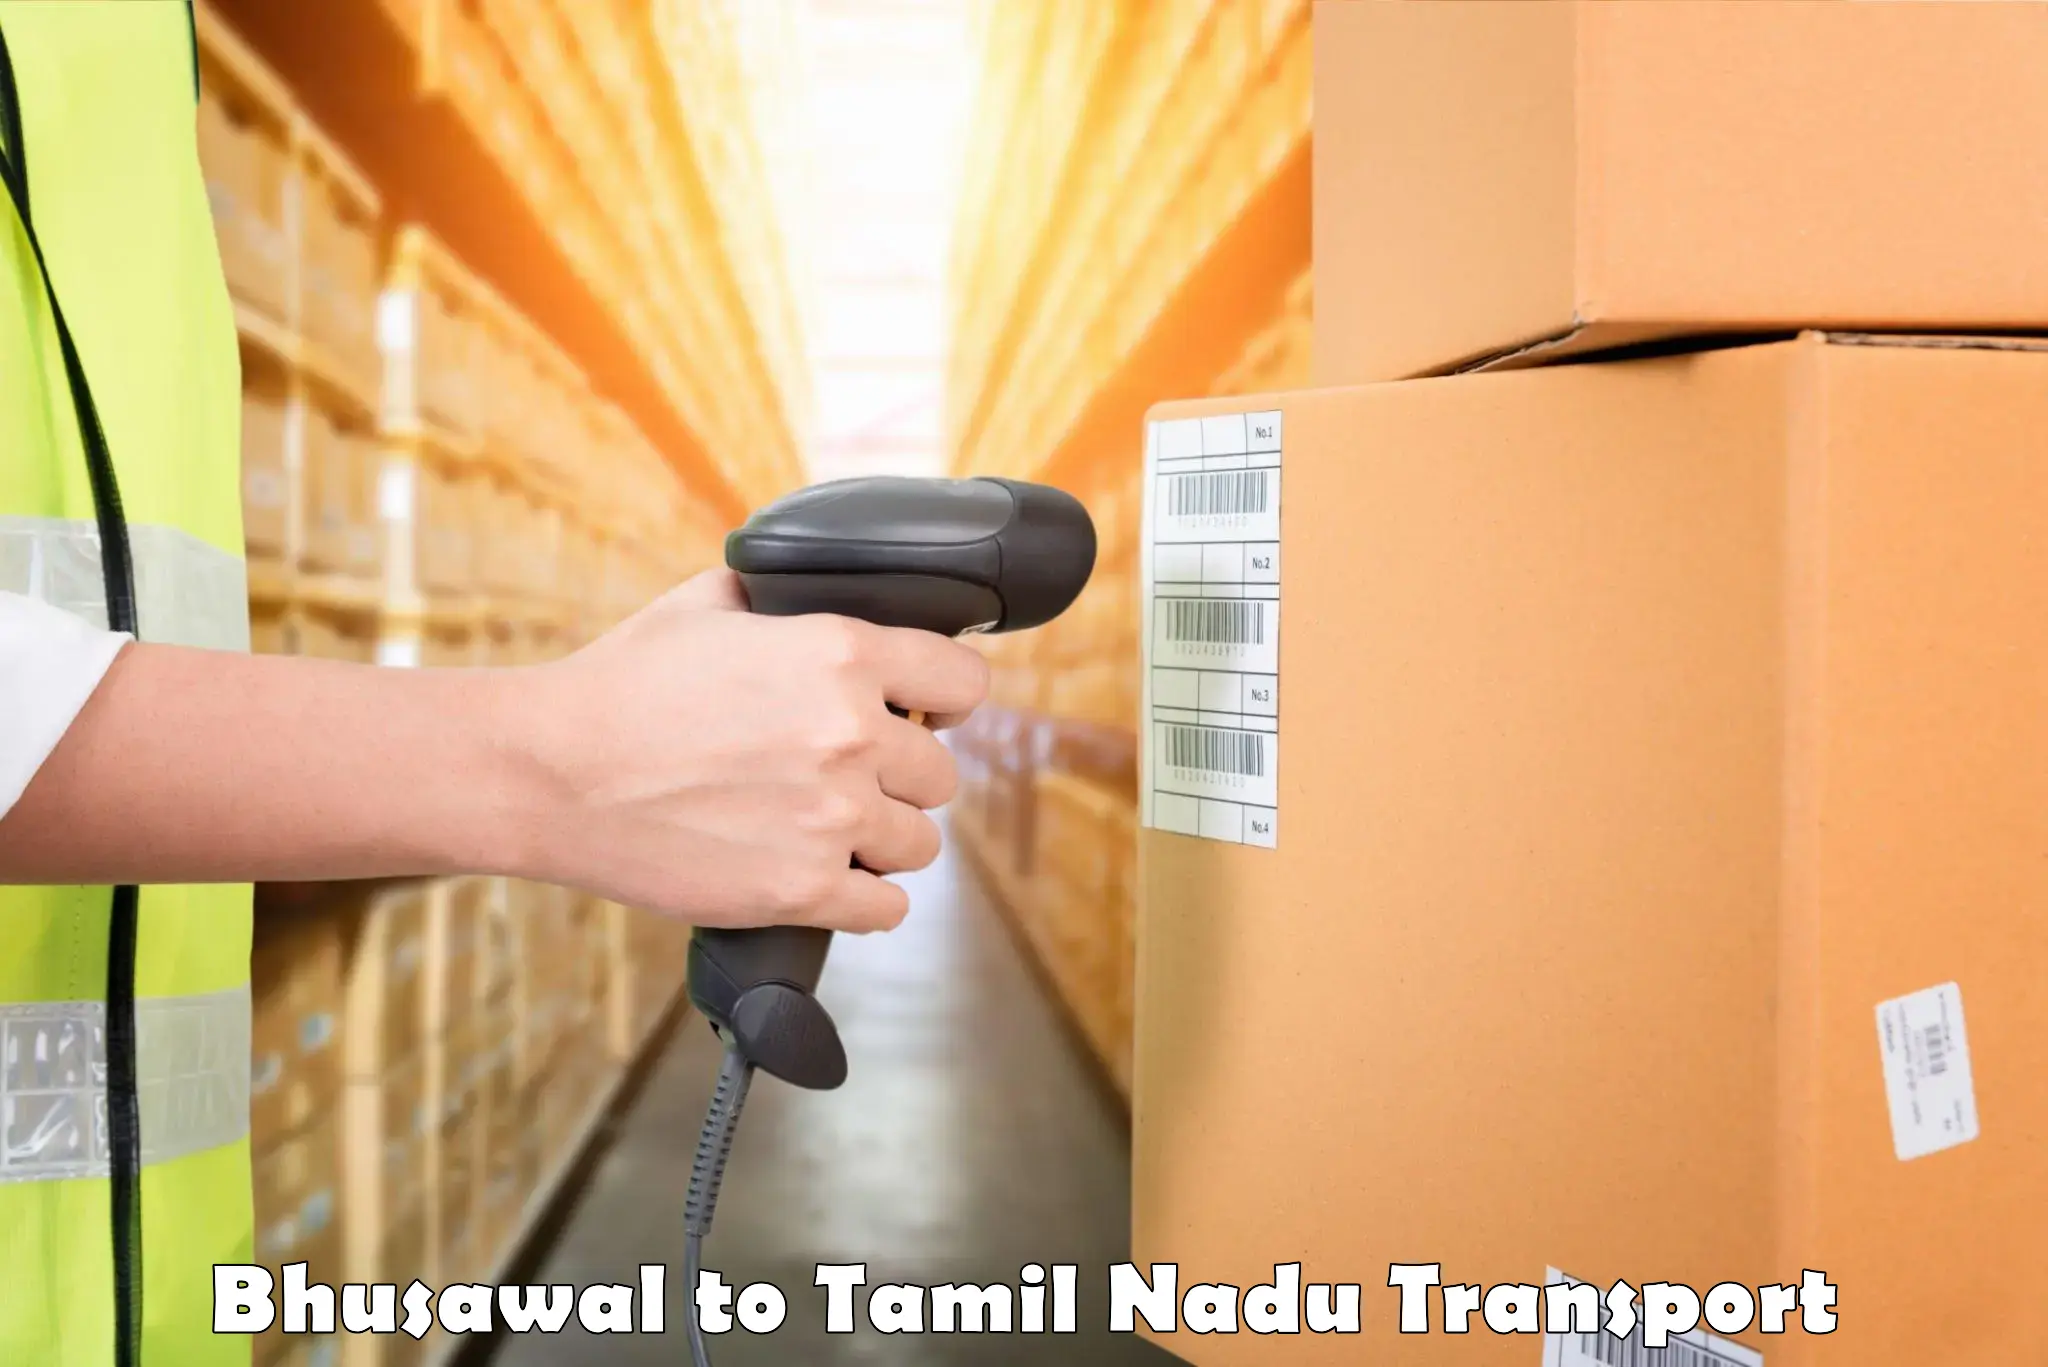 Delivery service Bhusawal to Tamil Nadu